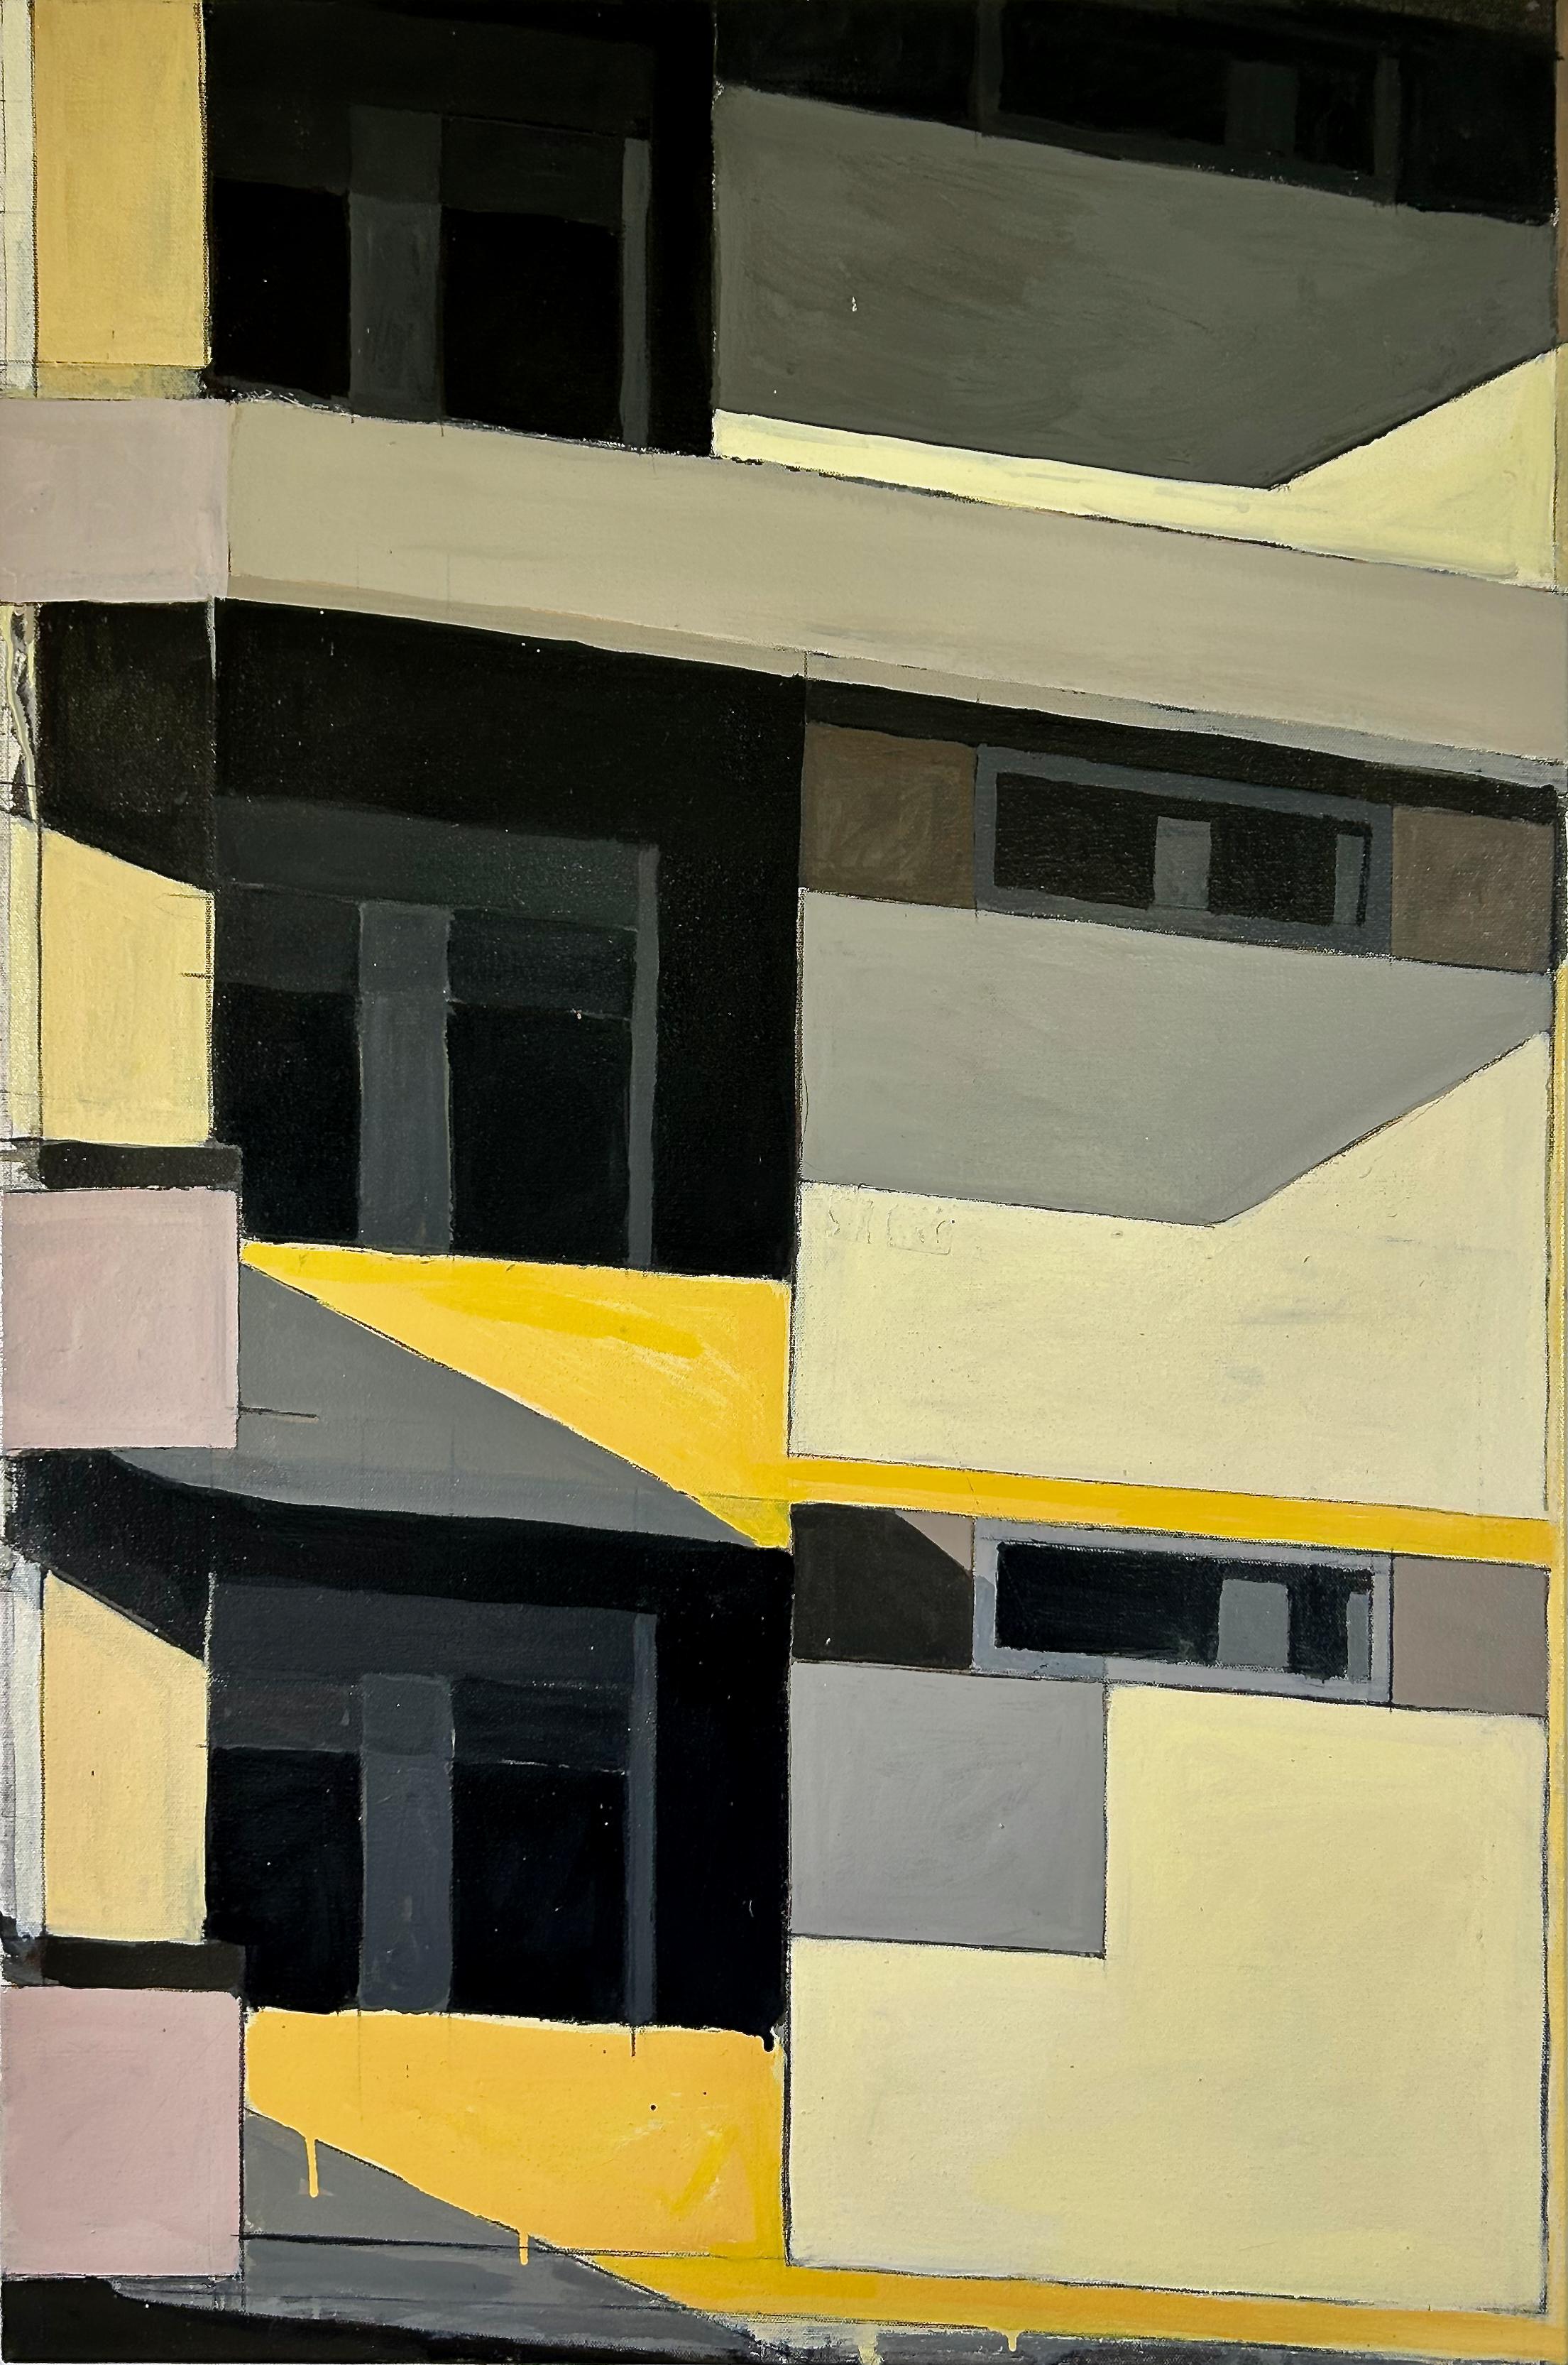 Abstract Painting Anthony Finta - Ospedale II (Abstract Mid Century Modernity, Building Facade in Black & Yellow)